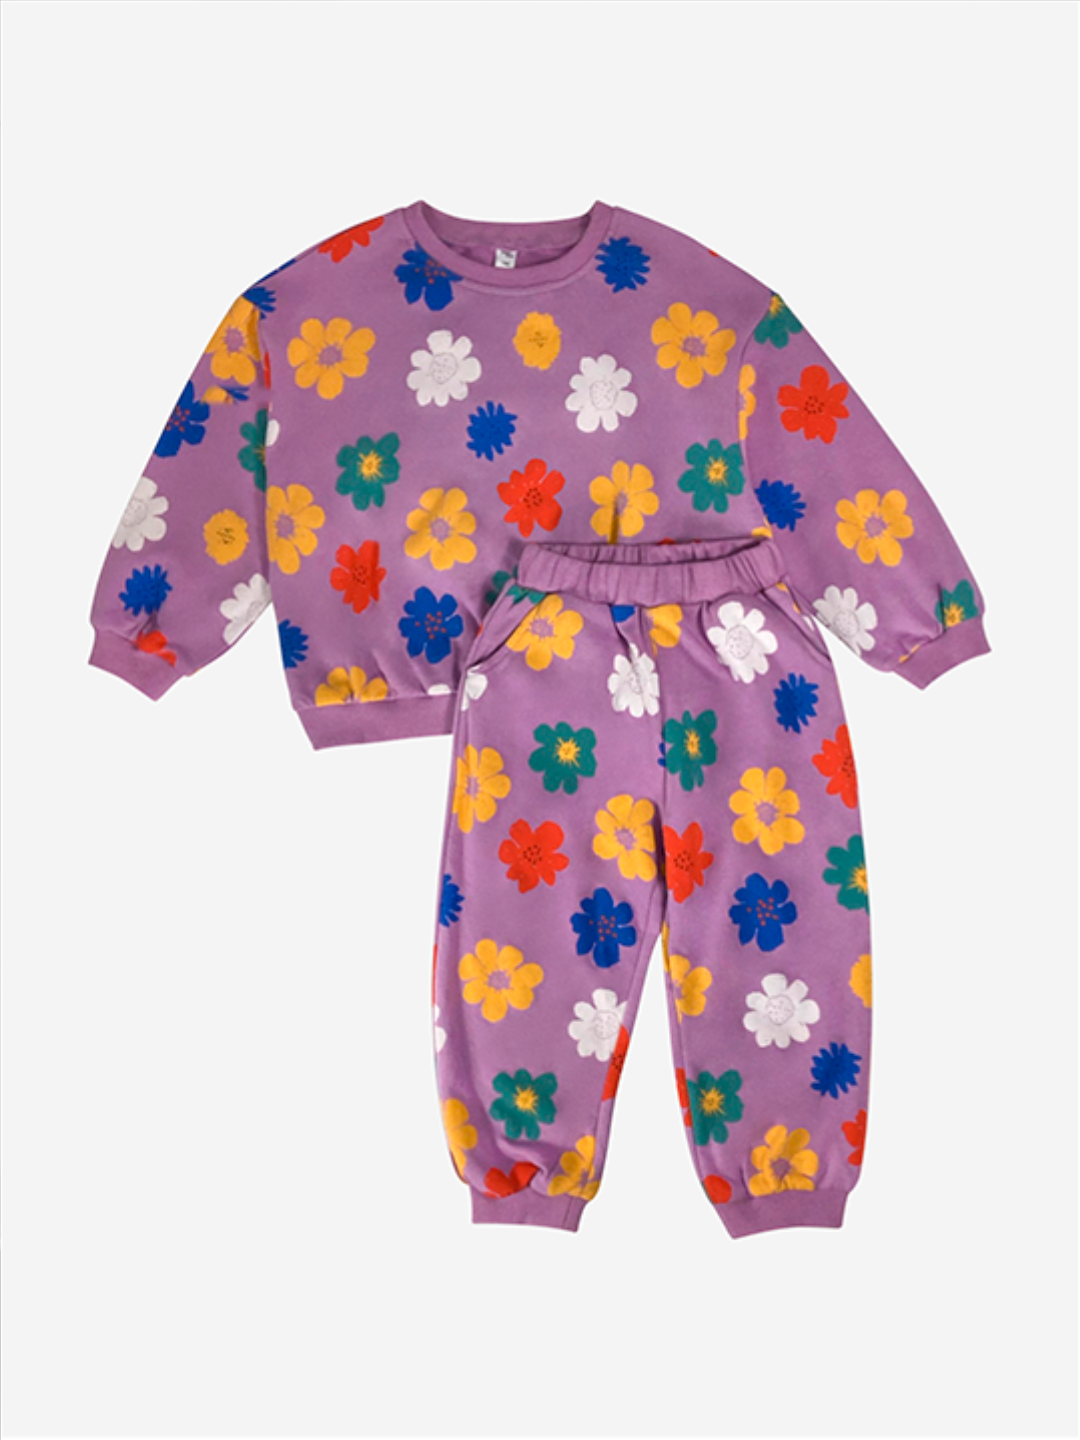 Purple | A kids' sweatshirt and pants set in purple with yellow, orange, green, blue and white flowers